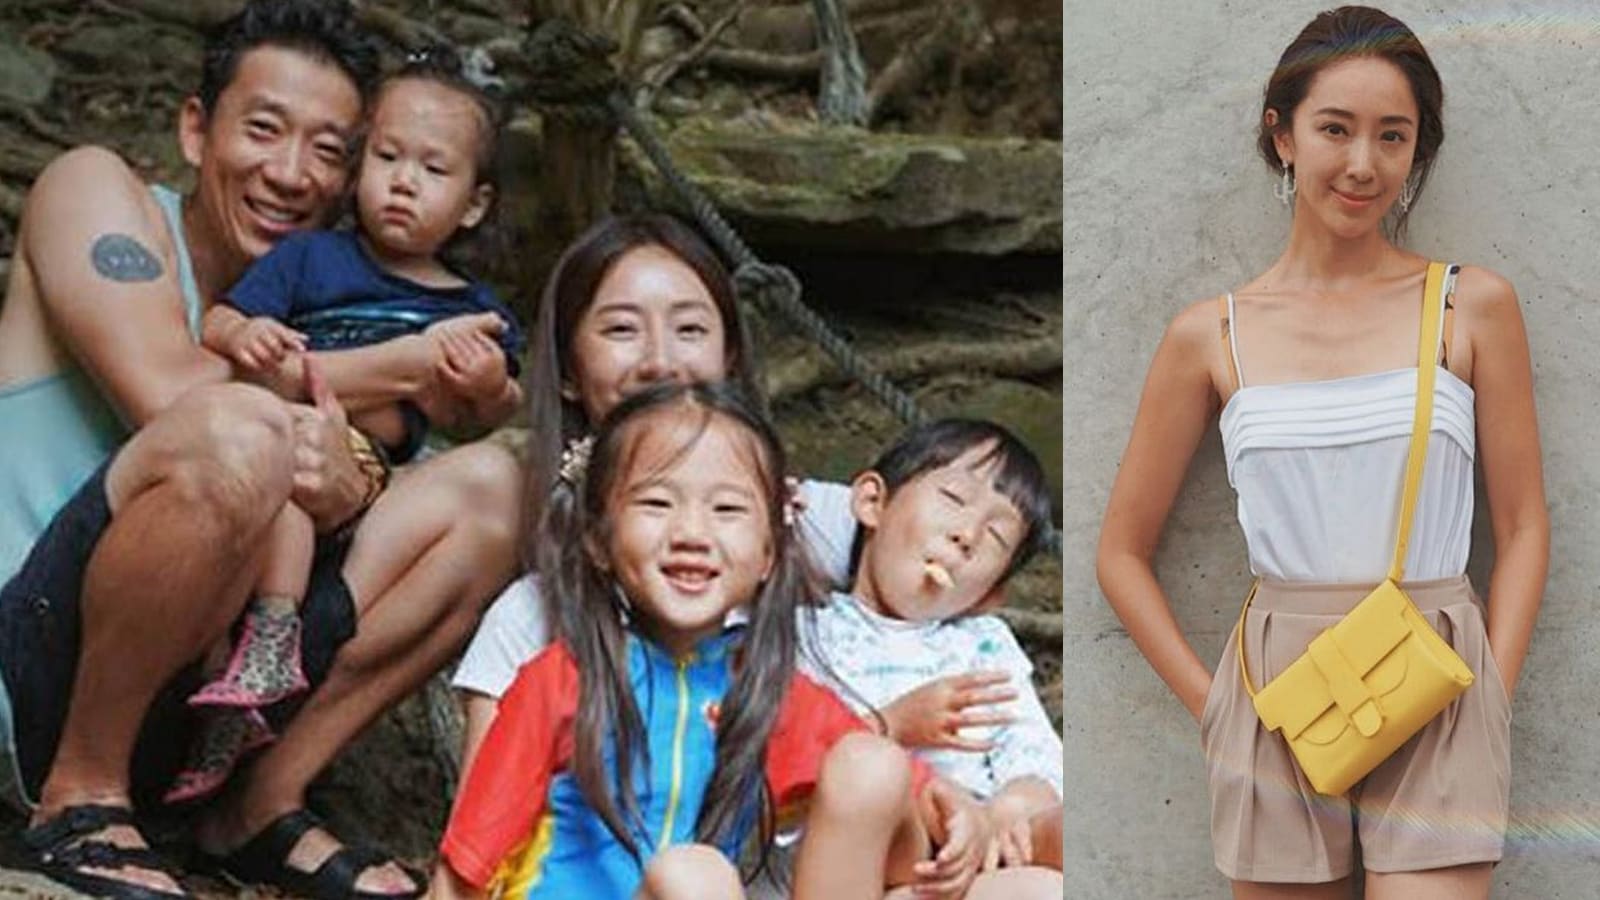 Mother-Of-3 Sonia Sui Says She Will “Try Her Best” Not To Get Pregnant Again